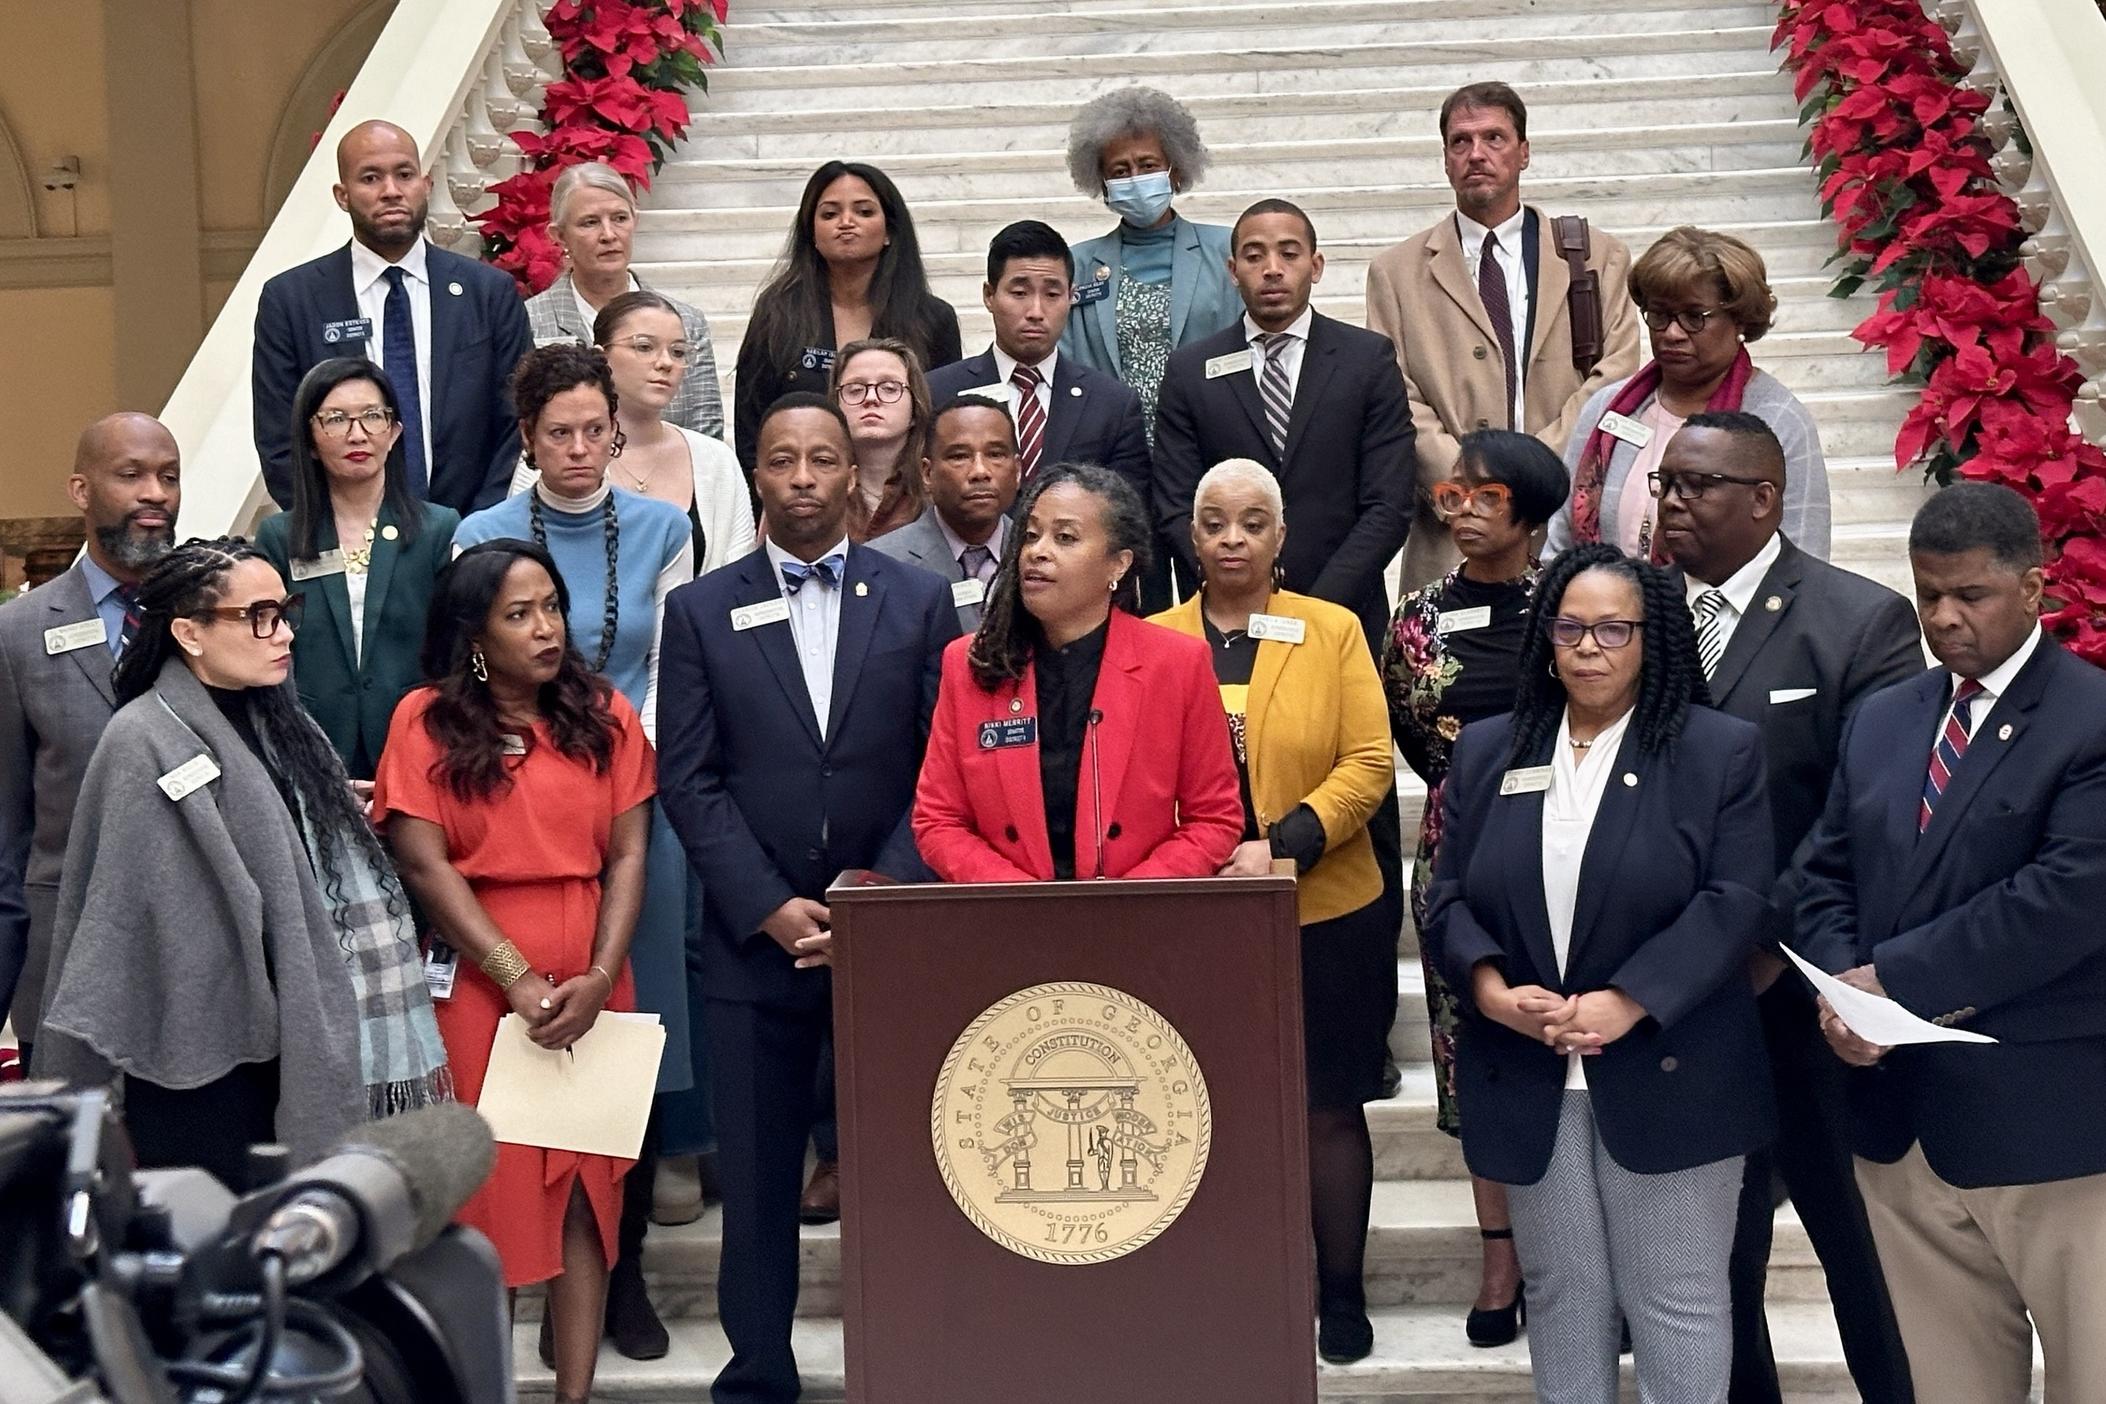 State Sen. Nikki Merritt, vice chair of the Georgia Legislative Black Caucus, speaks at the podium during a conference to protest the Republican redistricting maps presented during the Georgia General Assembly special session on Dec. 5, 2023.